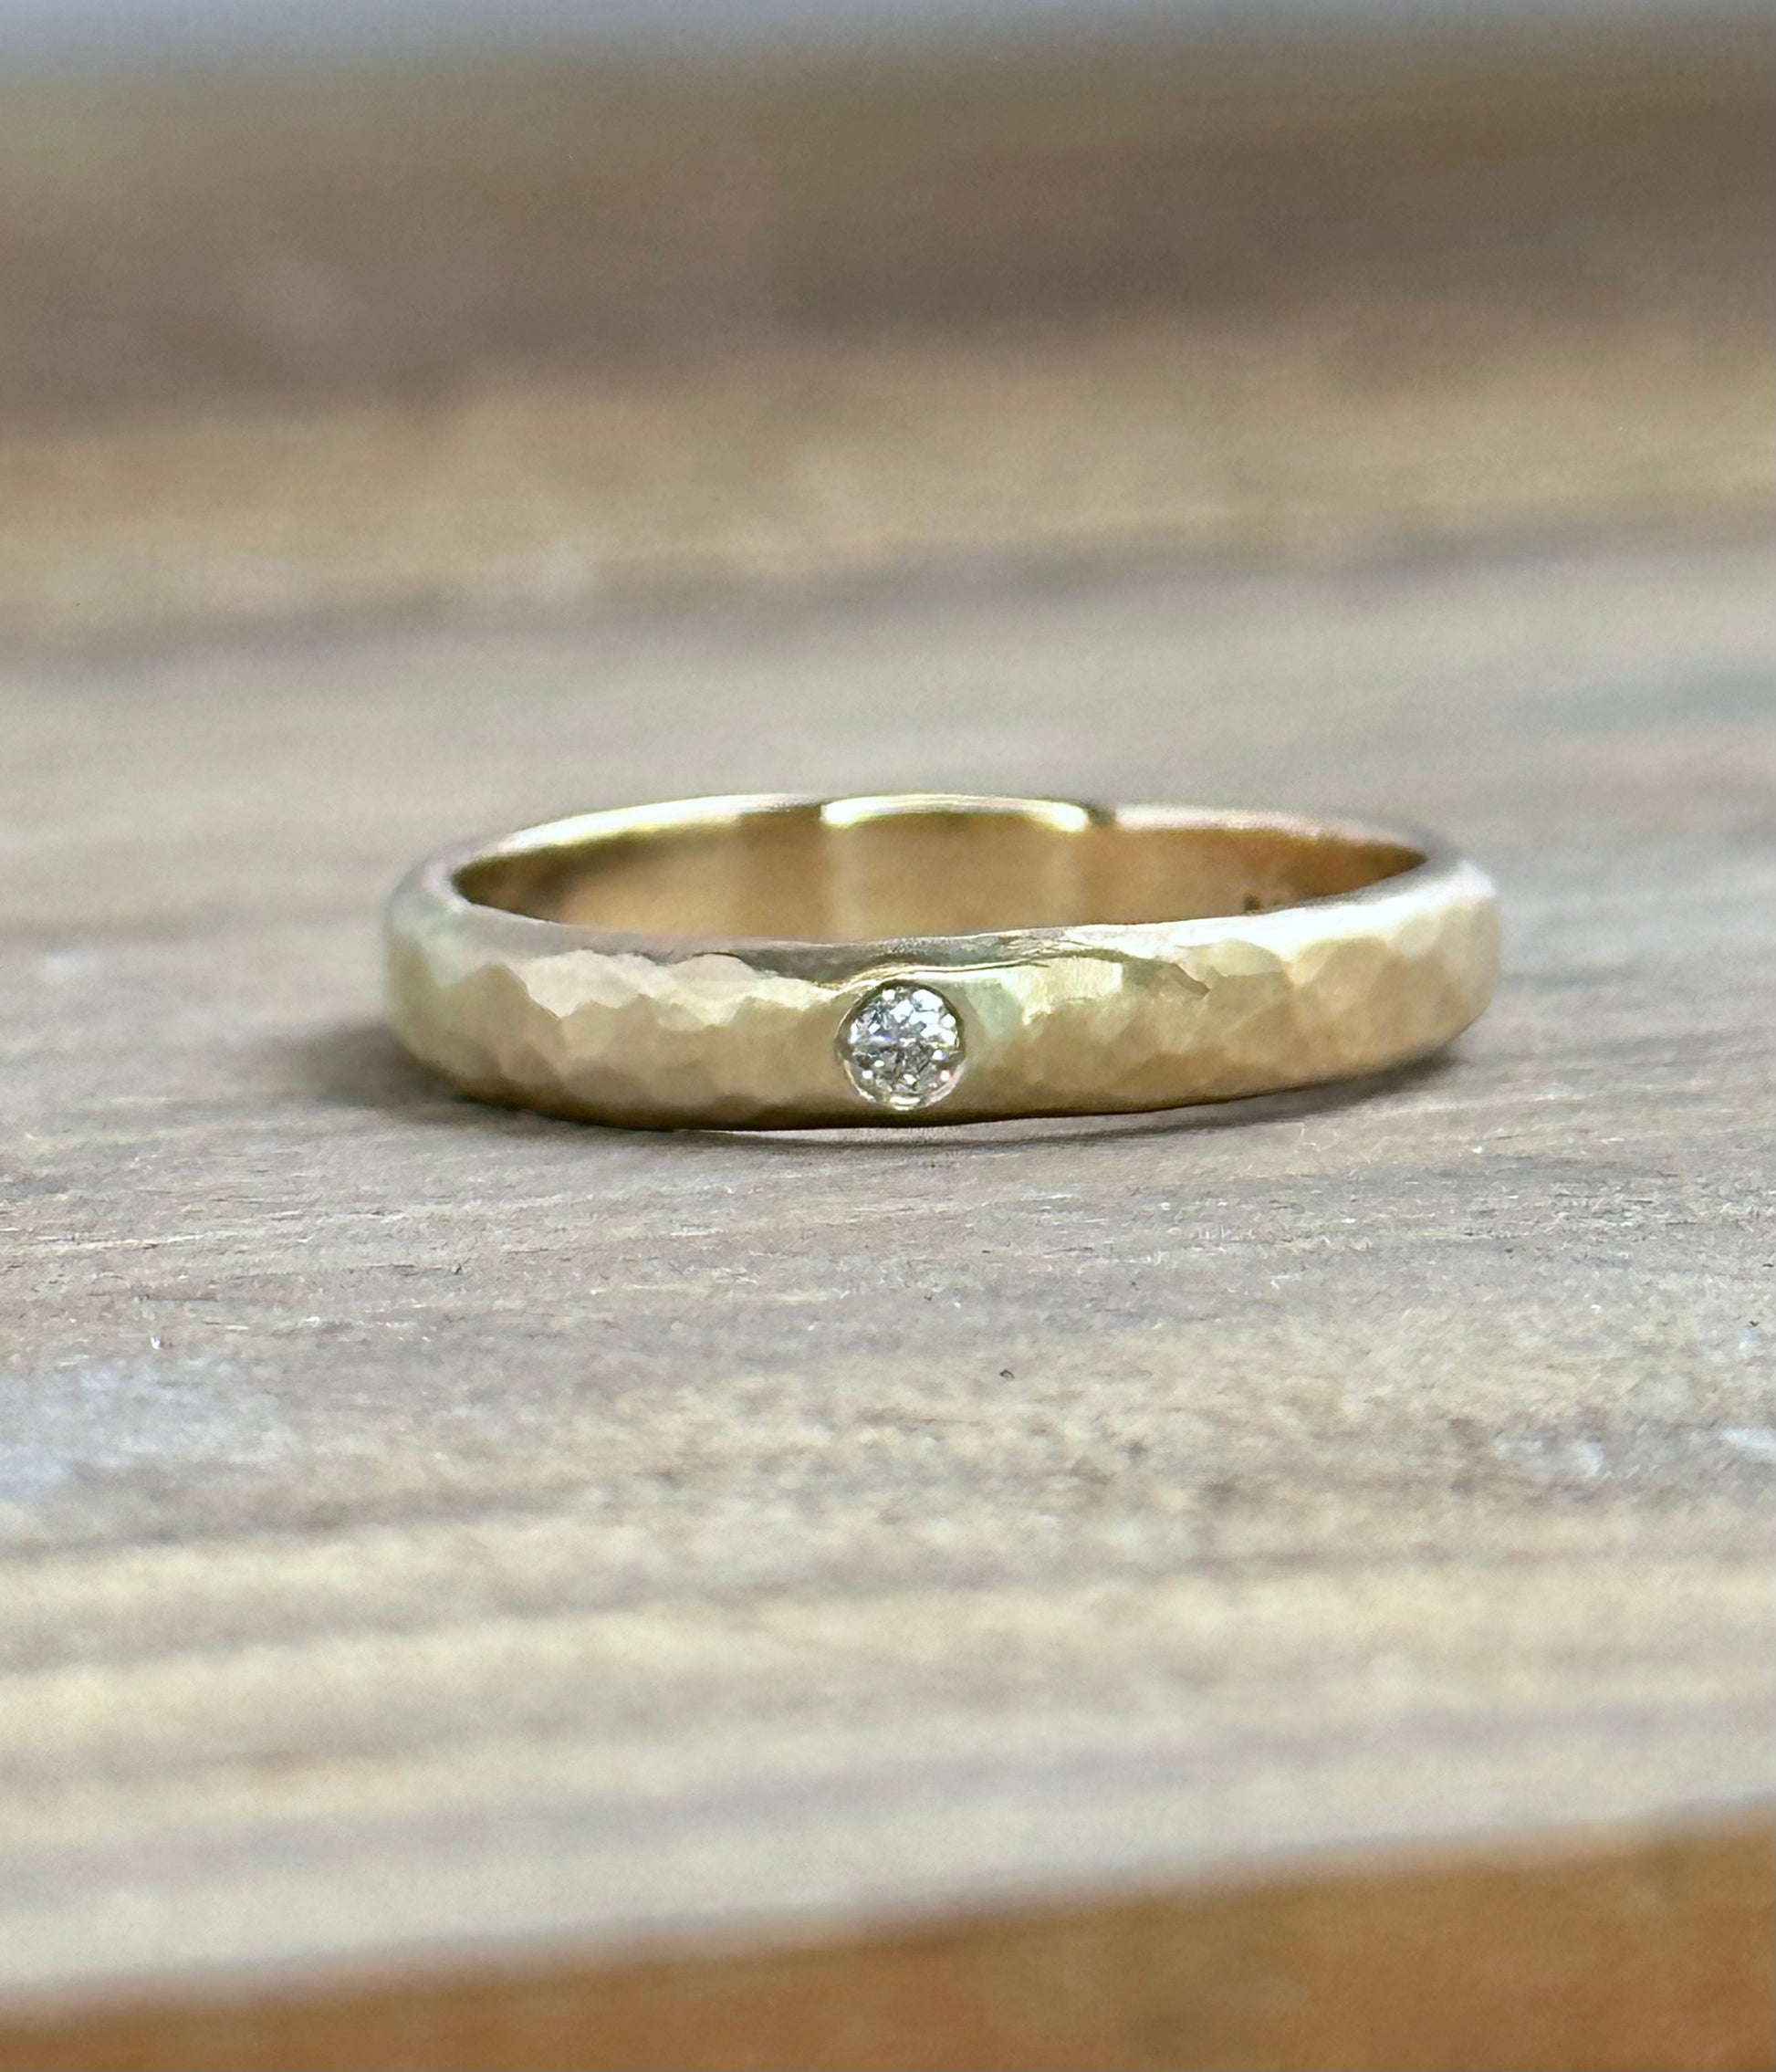 a gold textured ring iwth a single white diamond sits on a wooden background